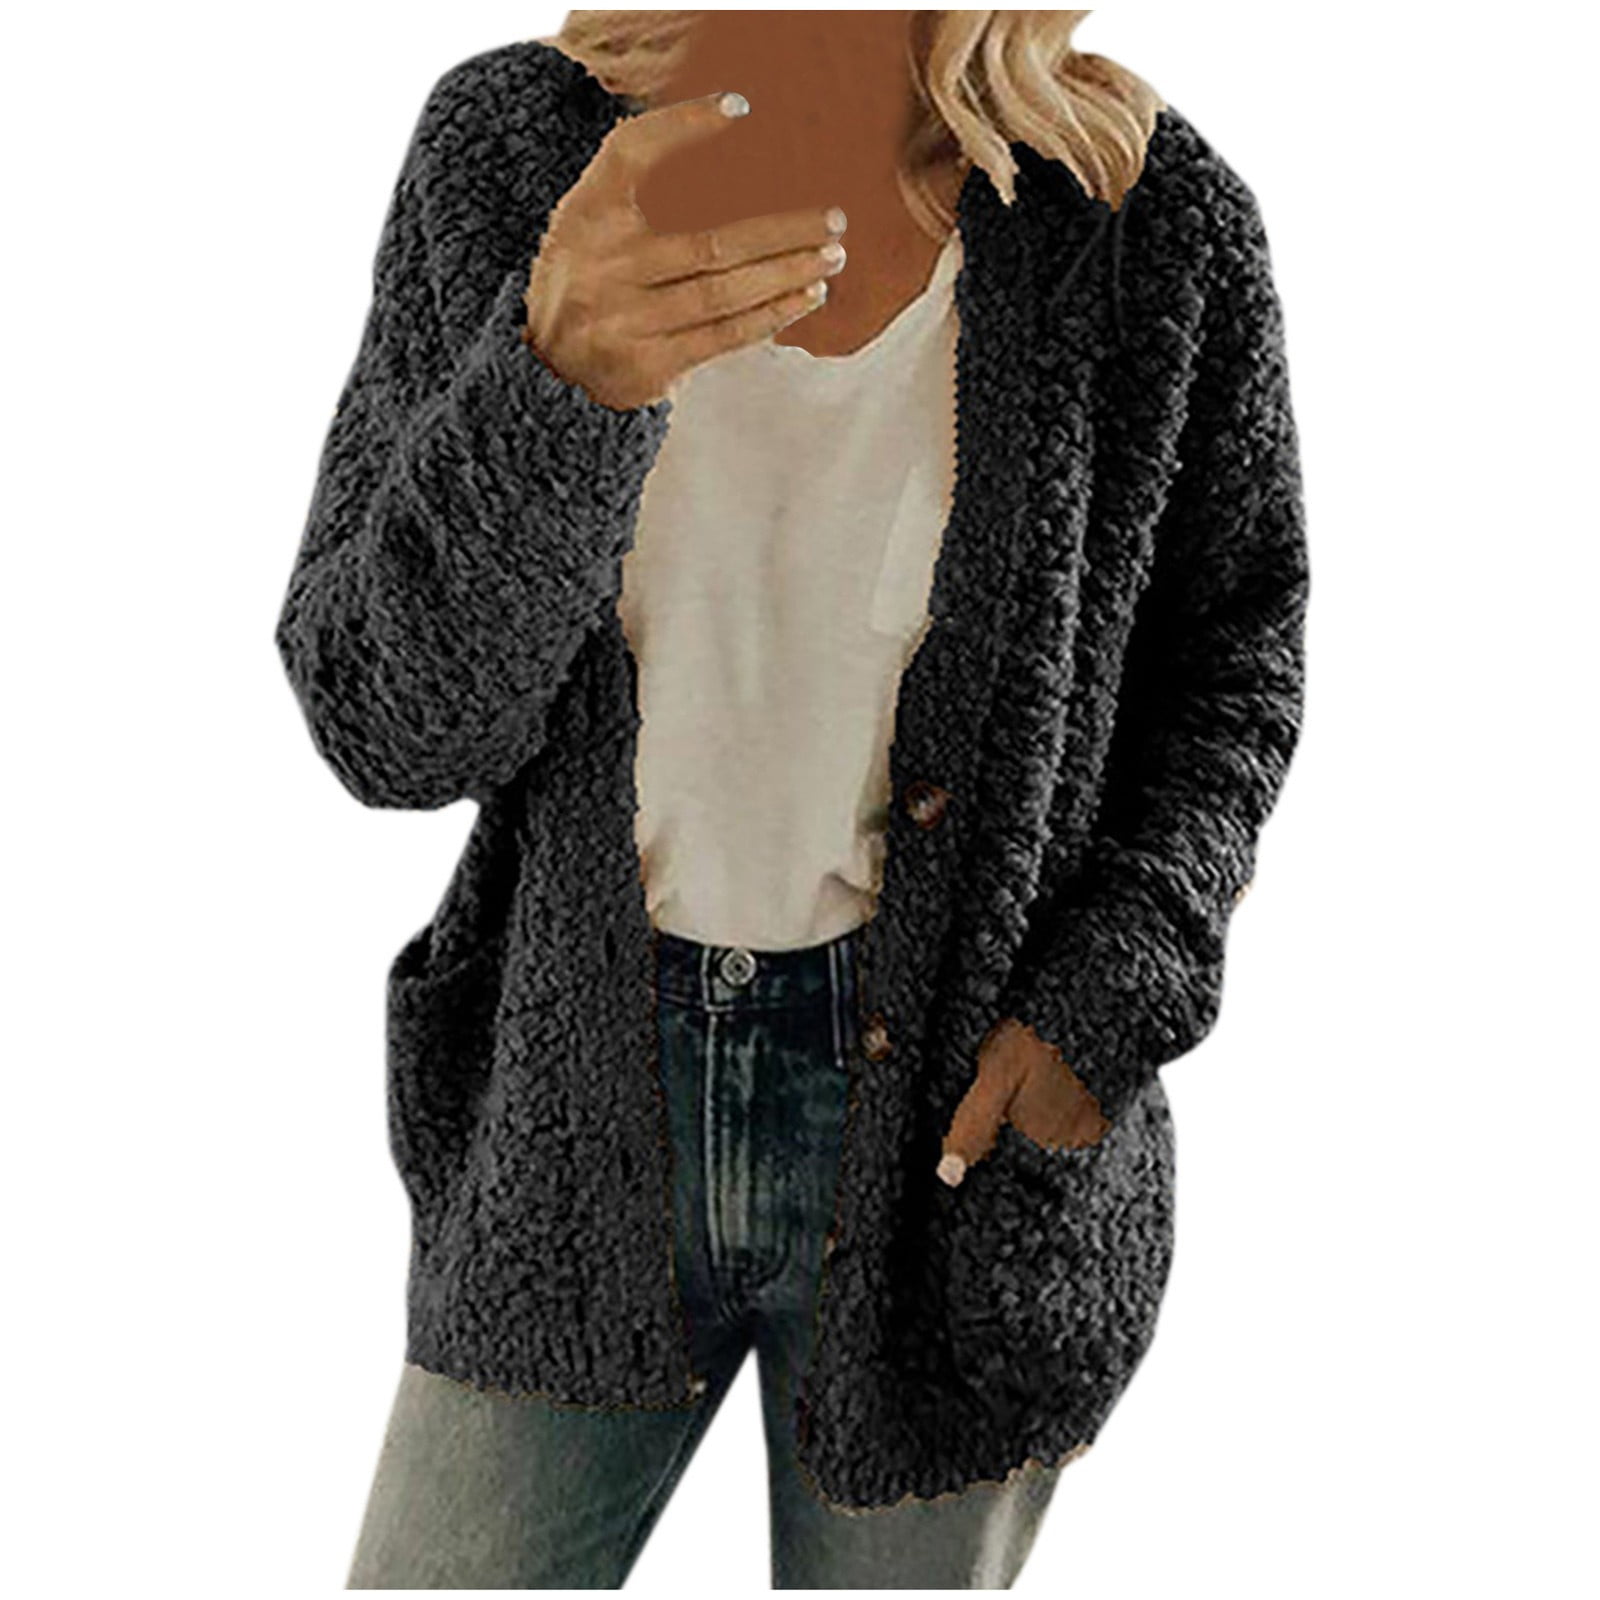 Black and Friday Womens Clothing Clearance under $5 asdoklhq Womens Plus  size Clearance Women Casual Plus Size Plush Sweater Pockets Outerwear  Buttons Cardigan Coat Purple-B XXXL 